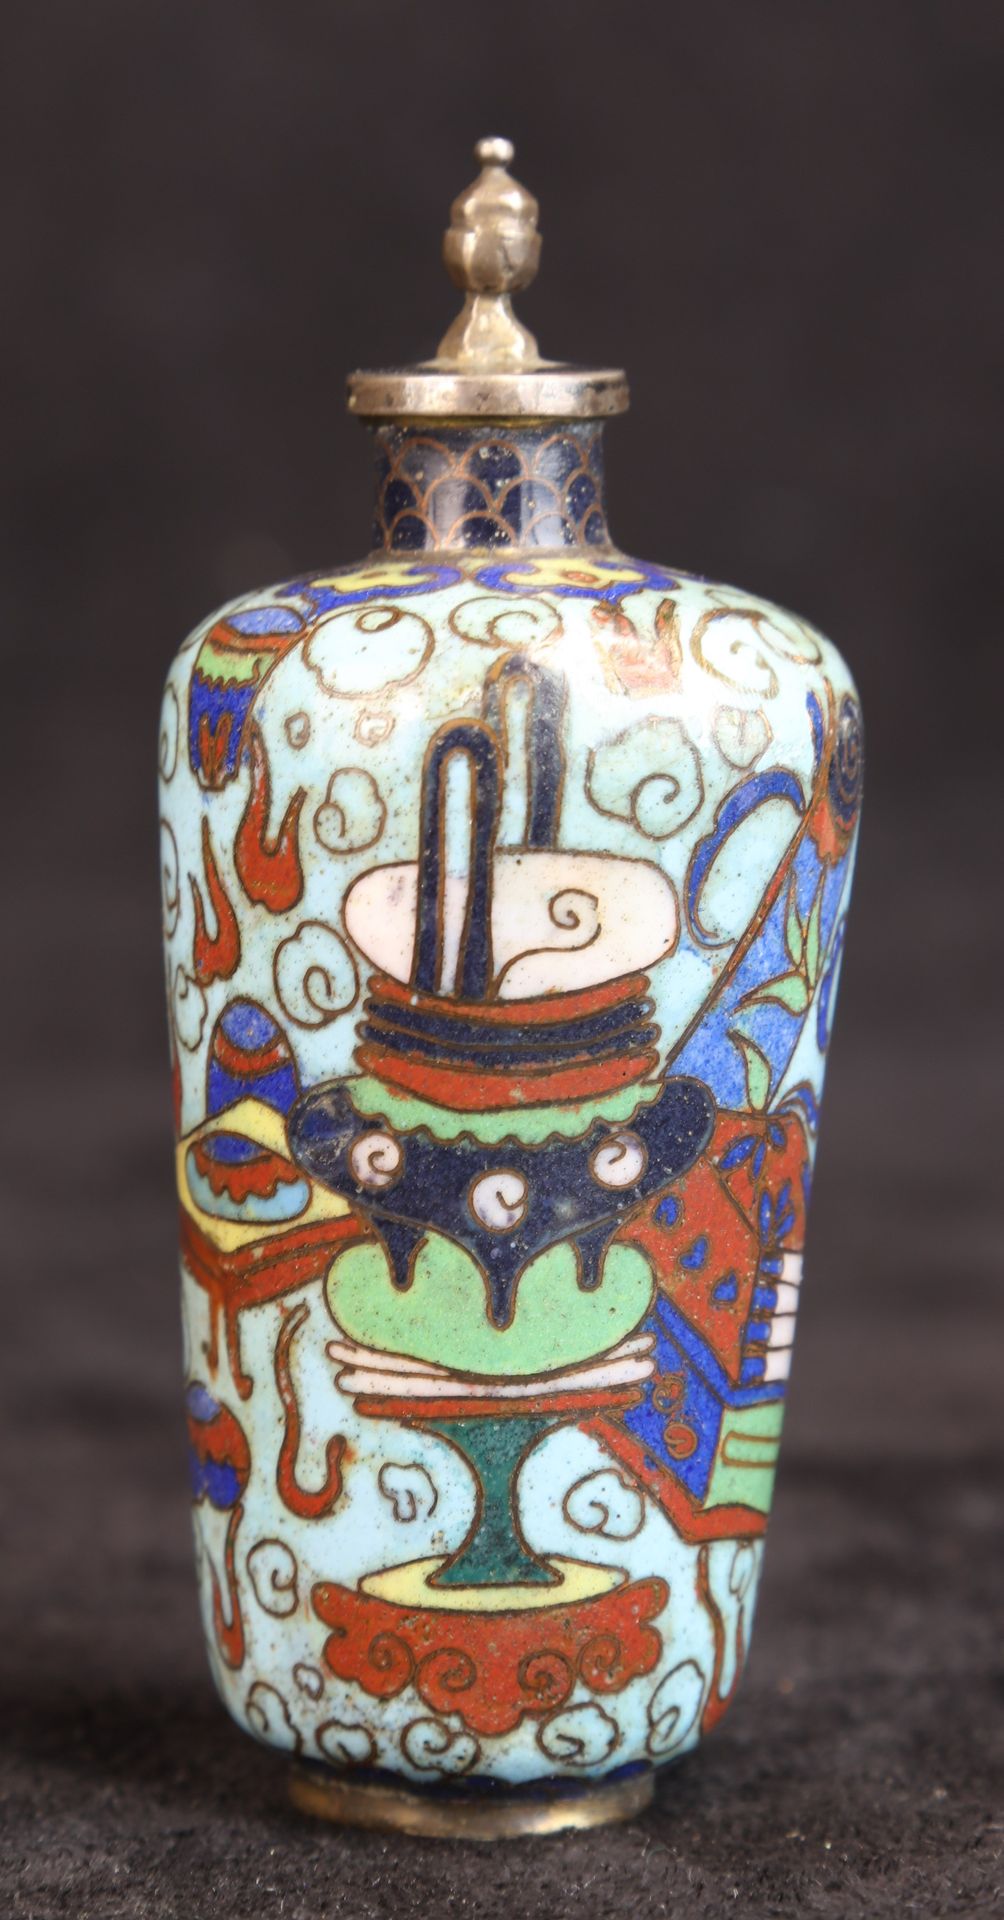 Null CHINA - XXth century, bronze and cloisonné enamel snuff bottle, with polych&hellip;